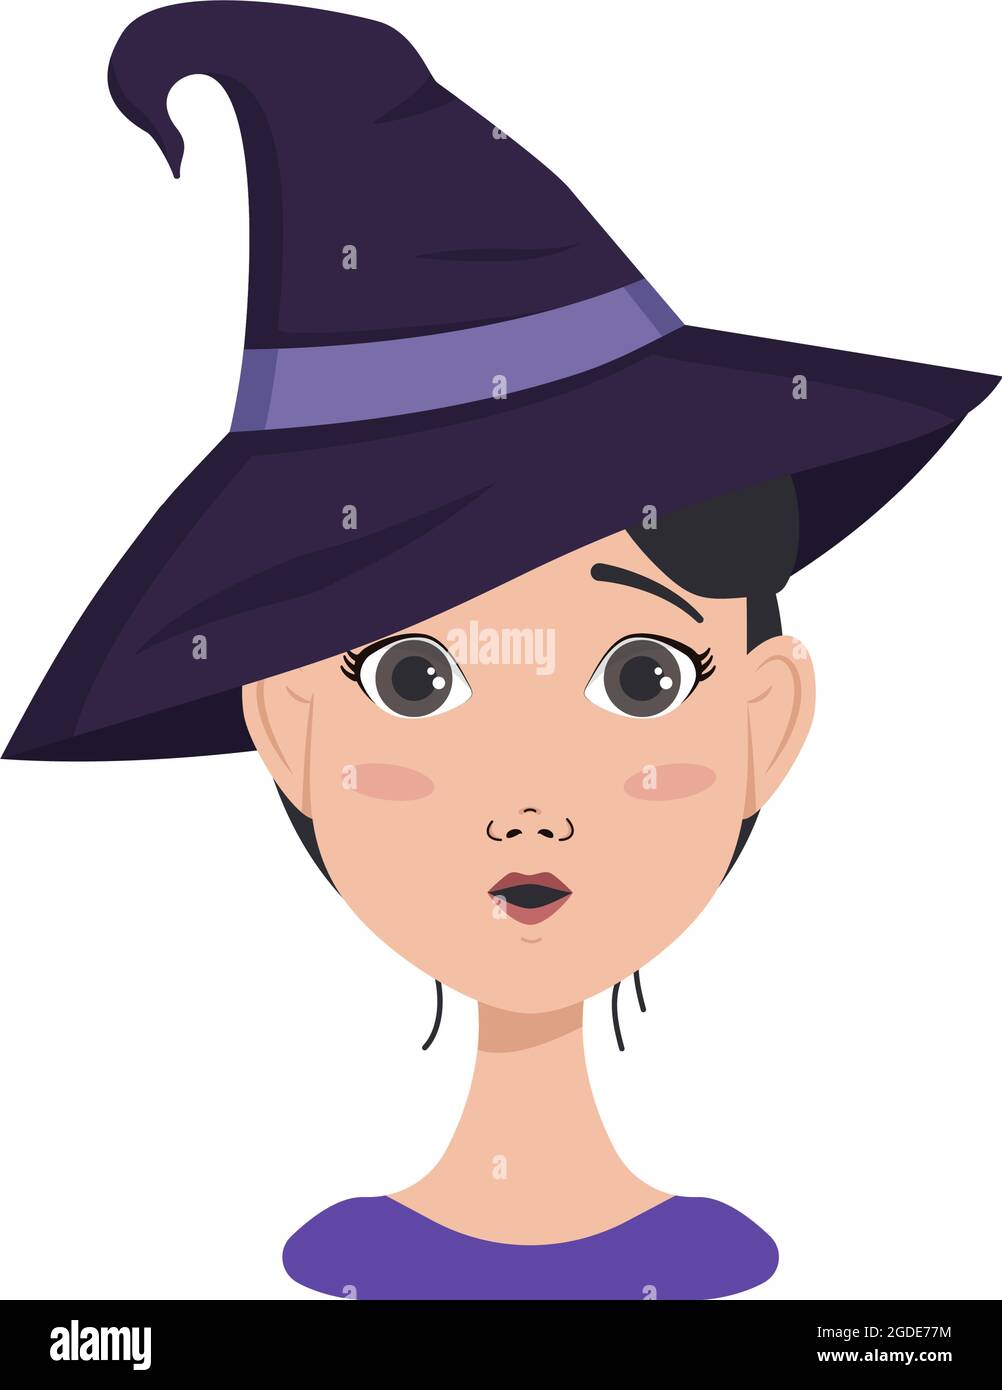 Avatar of asian woman with dark hair, surprise emotions, open eyed face and round mouth, wearing a witch hat. Halloween character in costume Stock Vector